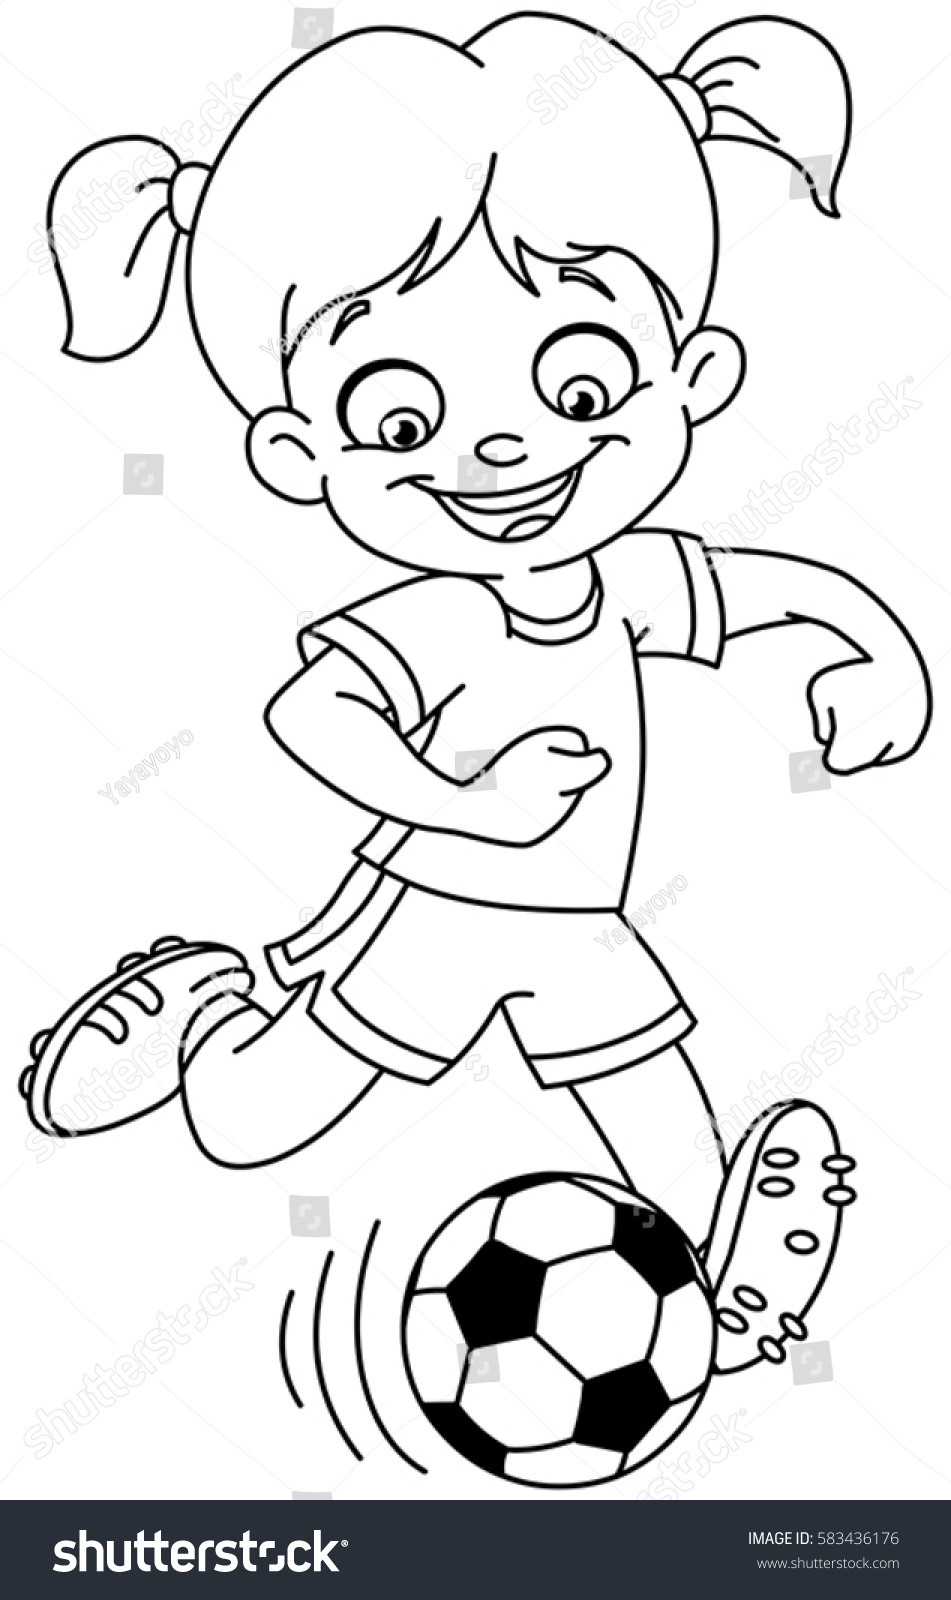 Girl Soccer Coloring Pages
 Outlined Young Girl Playing Soccer Vector Stock Vector